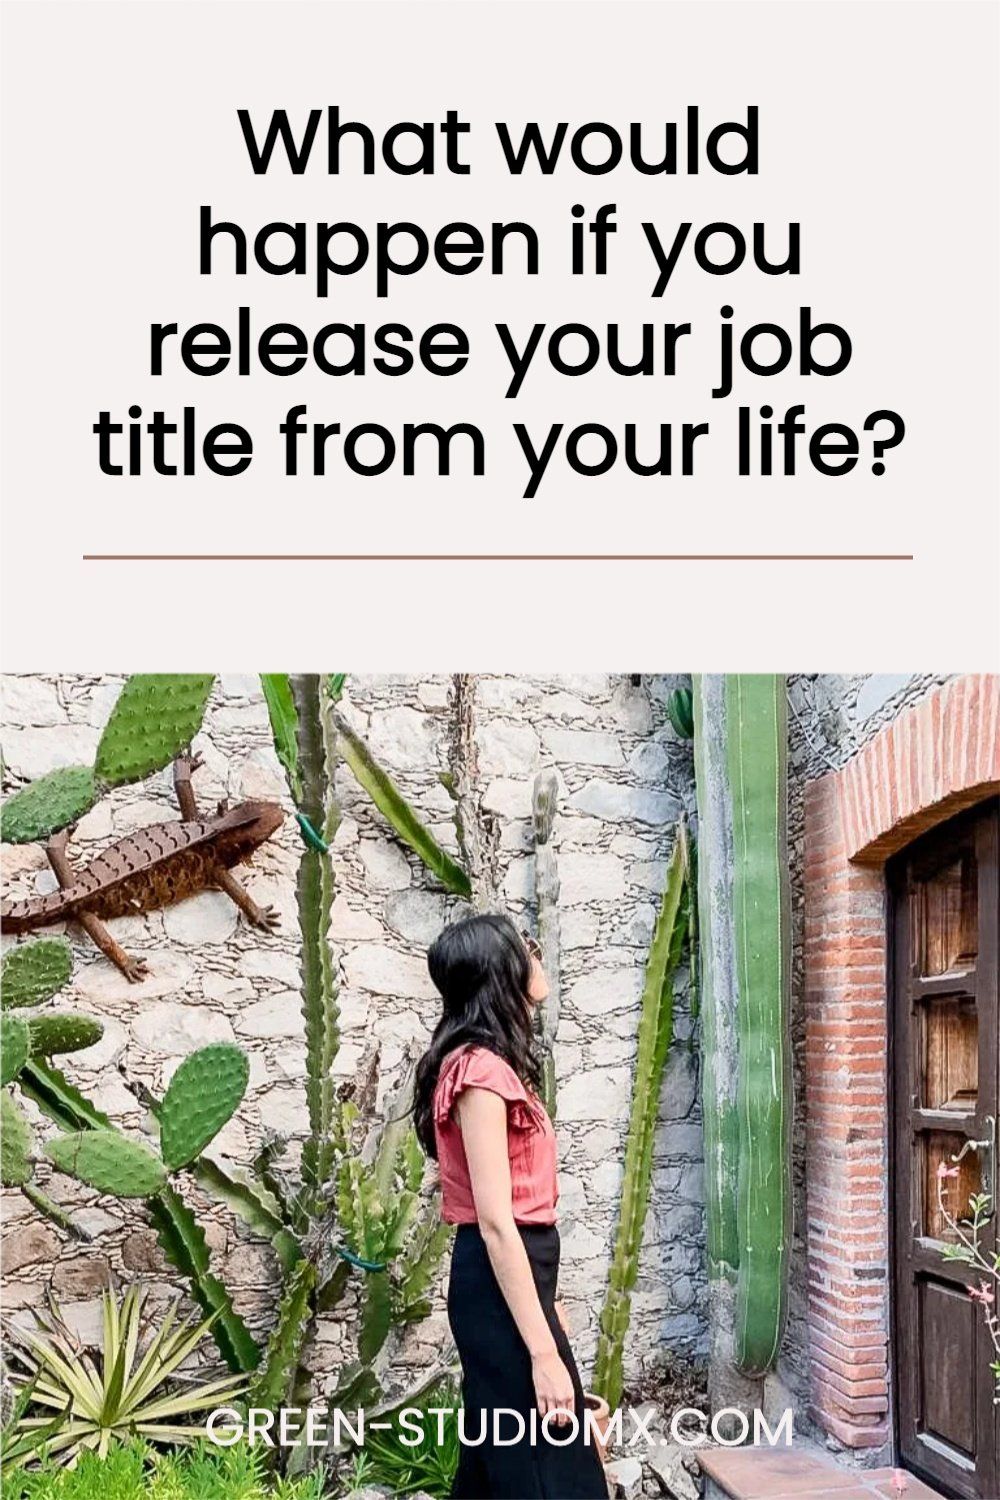 HOW TO RELEASE YOUR JOB TITLE FROM YOUR LIFE